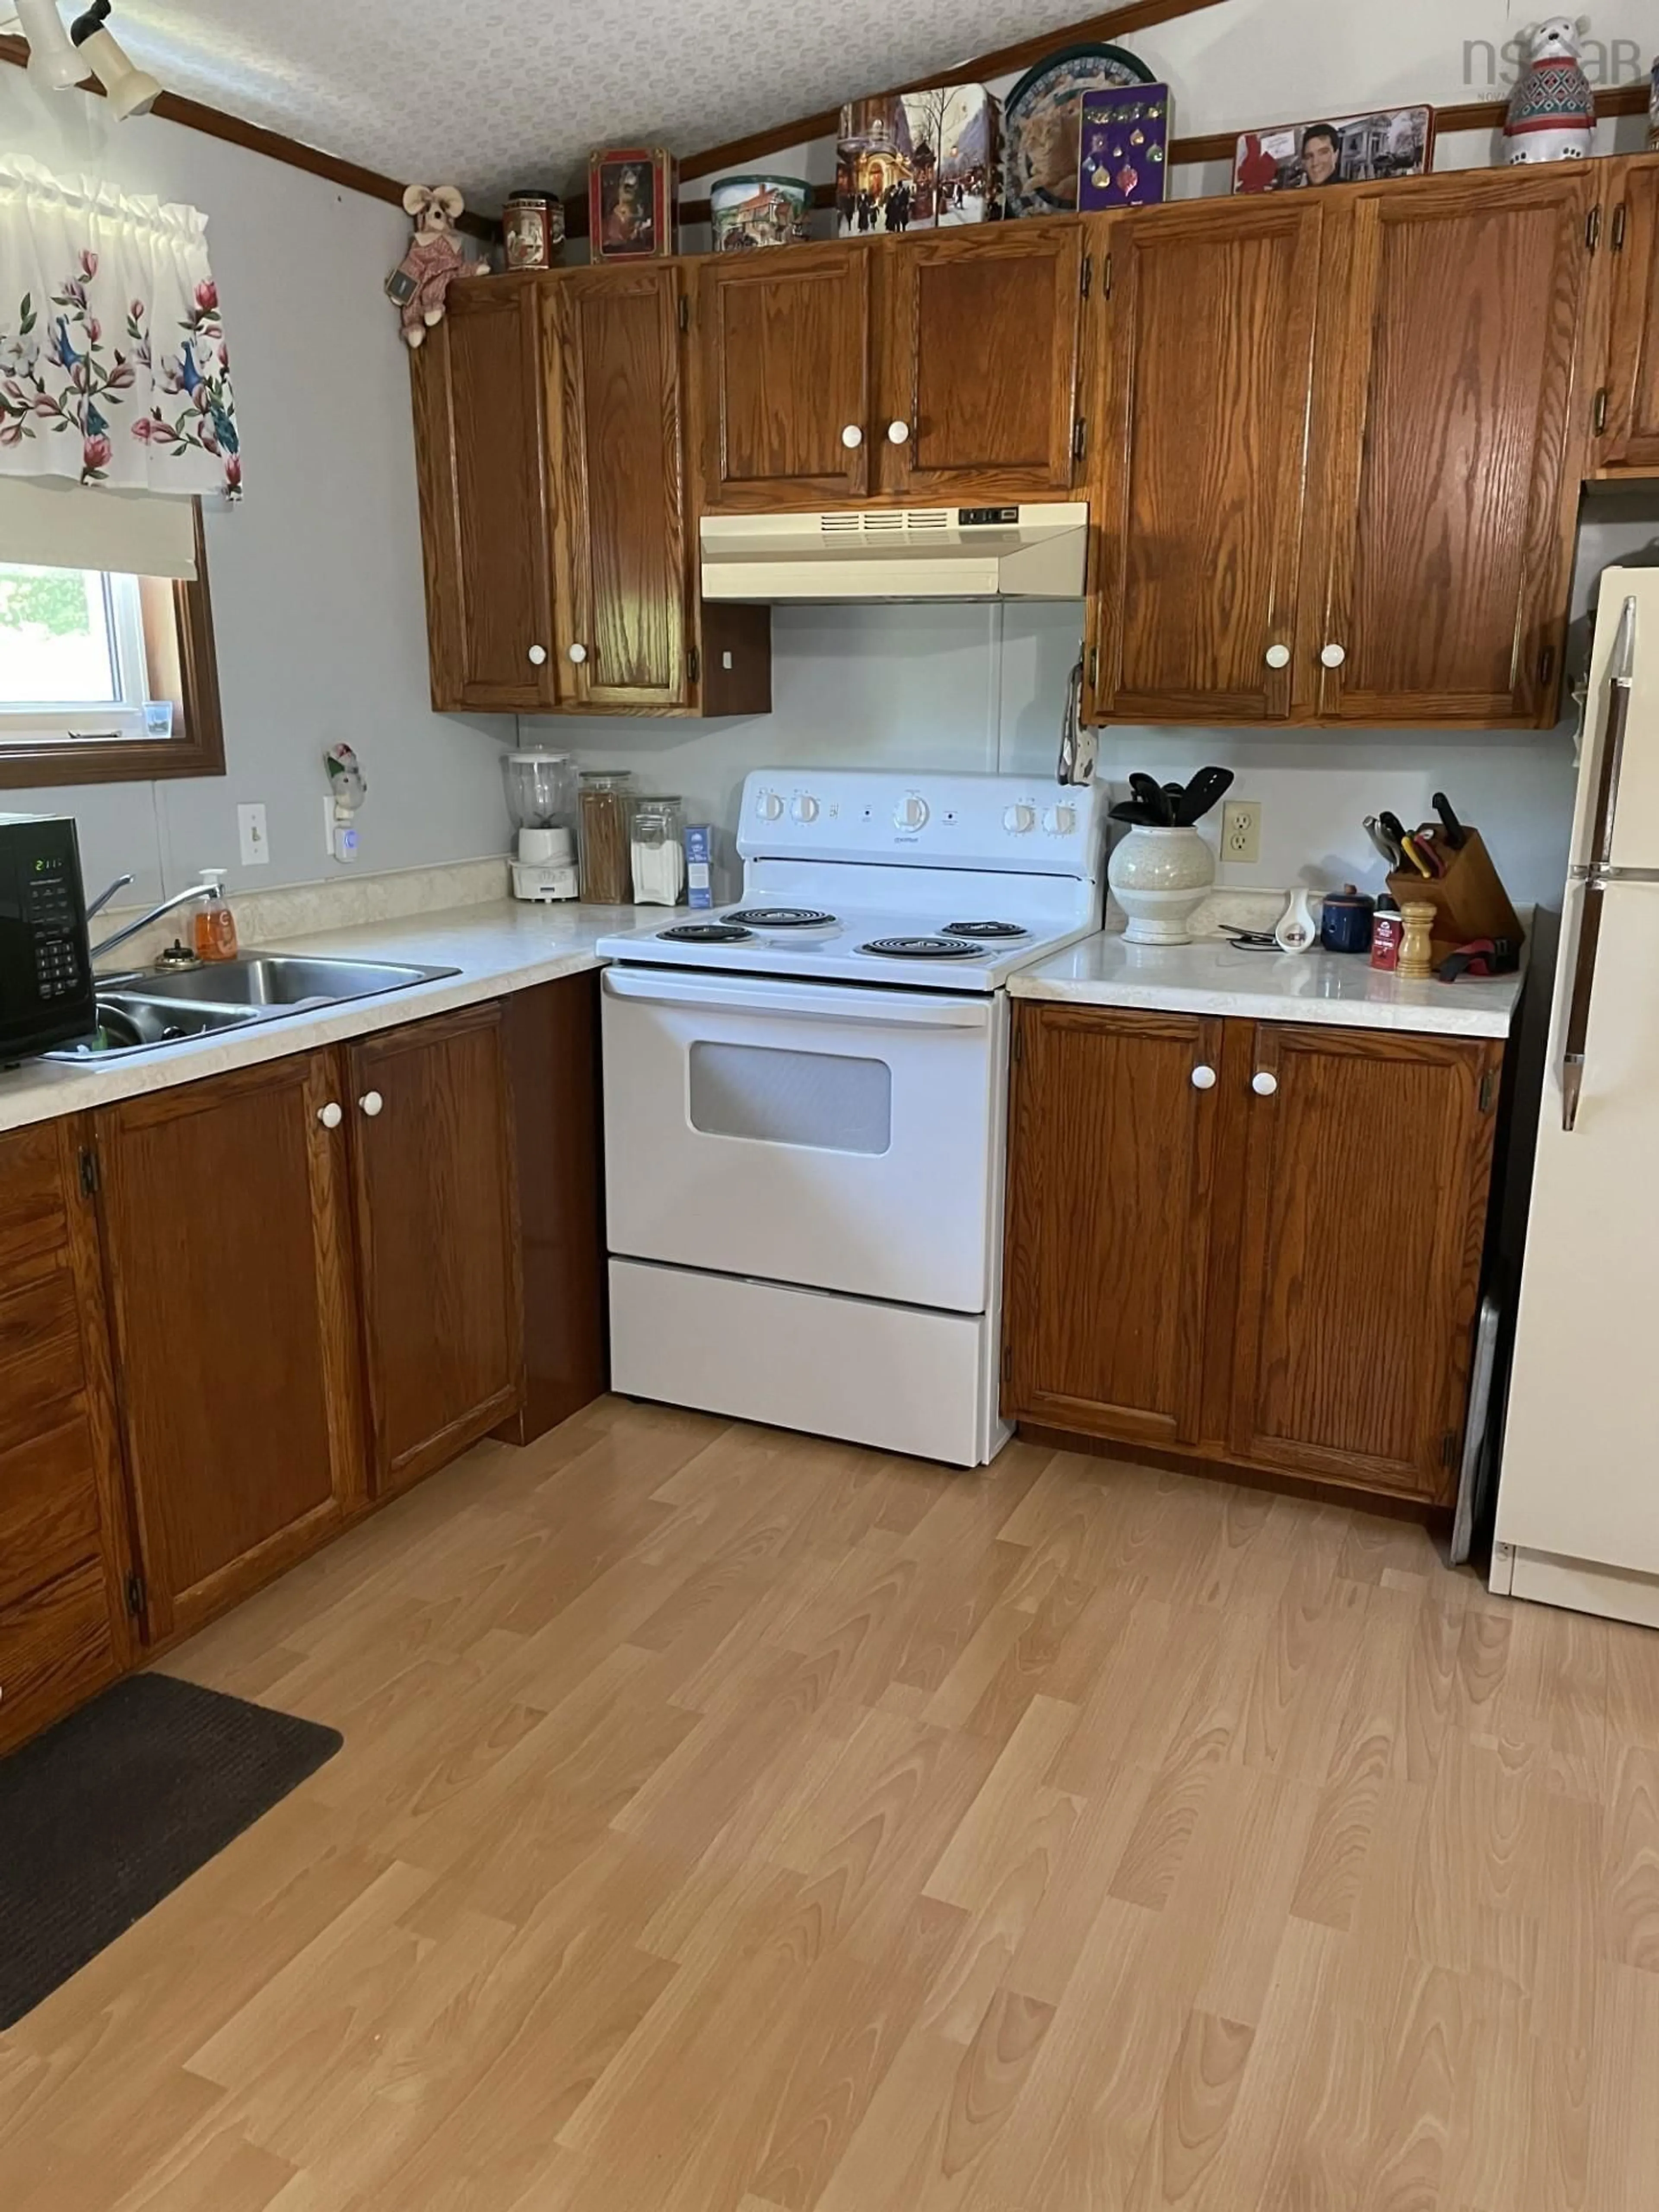 Standard kitchen for 305 East Tracadie Rd, East Tracadie Nova Scotia B0H 1W0